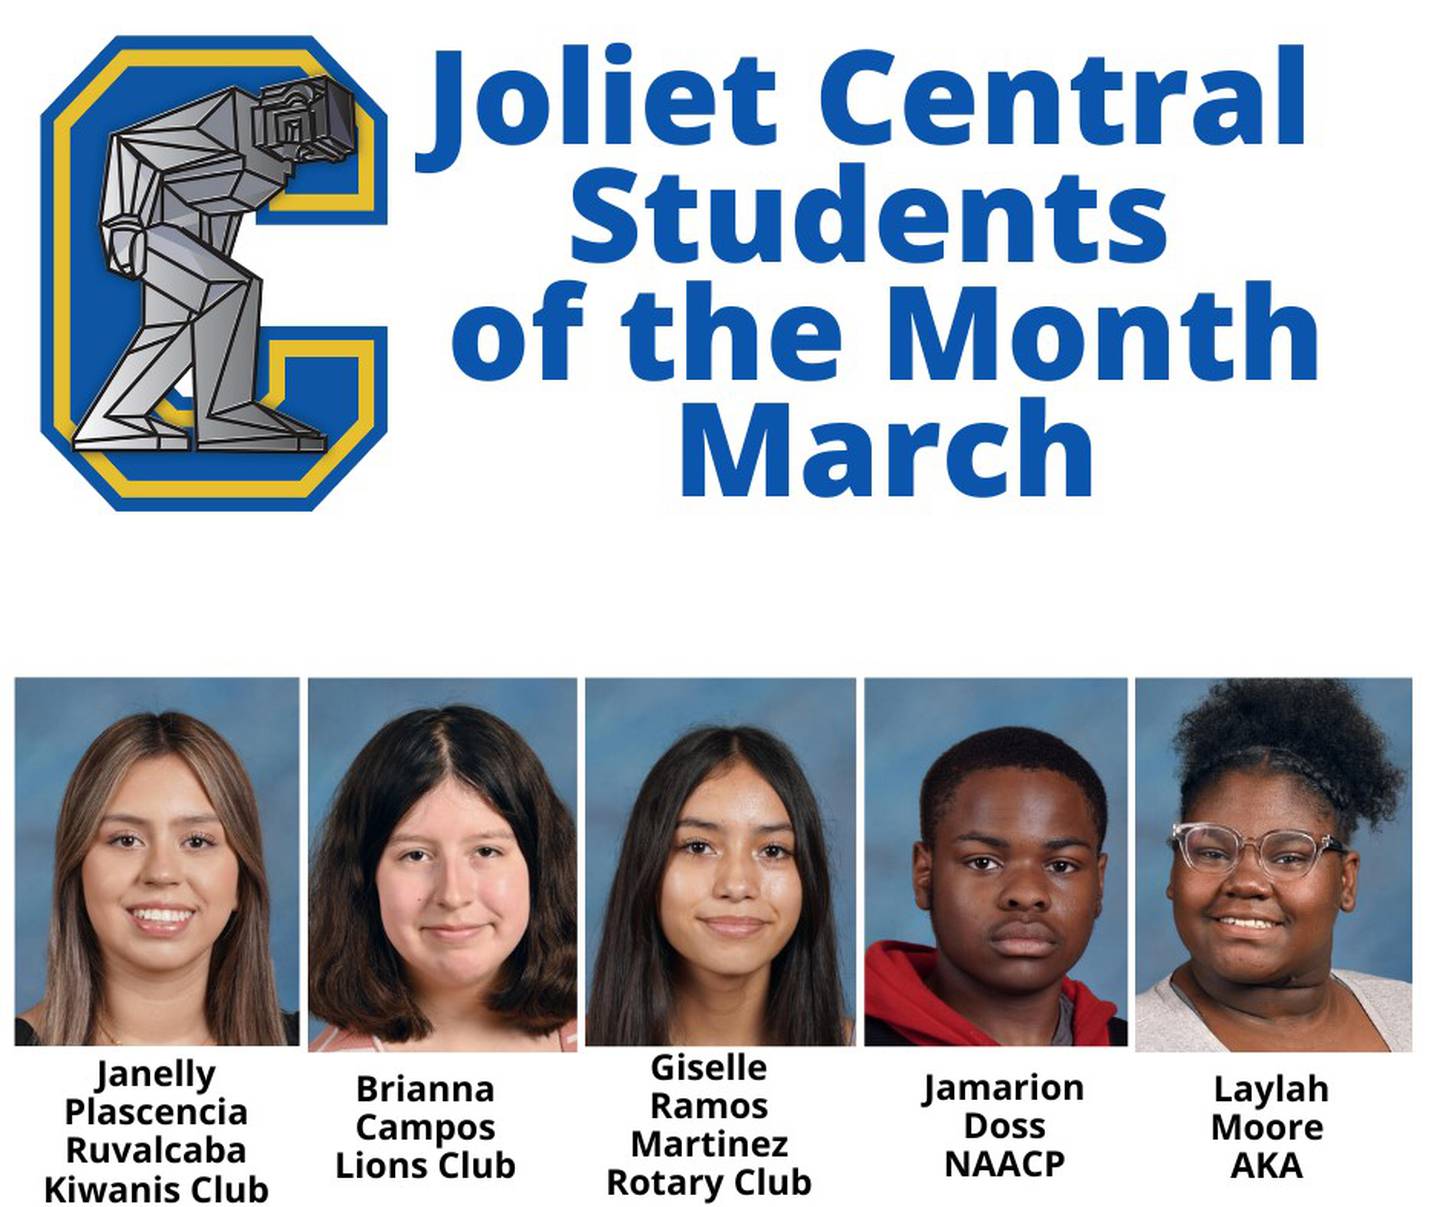 The Joliet Central High School Students of the Month for March 2024 are Janelly Plascencia Ruvalcaba, Brianna Campos, Giselle Ramos Martinez, Jamarion Doss and Laylah Moore.